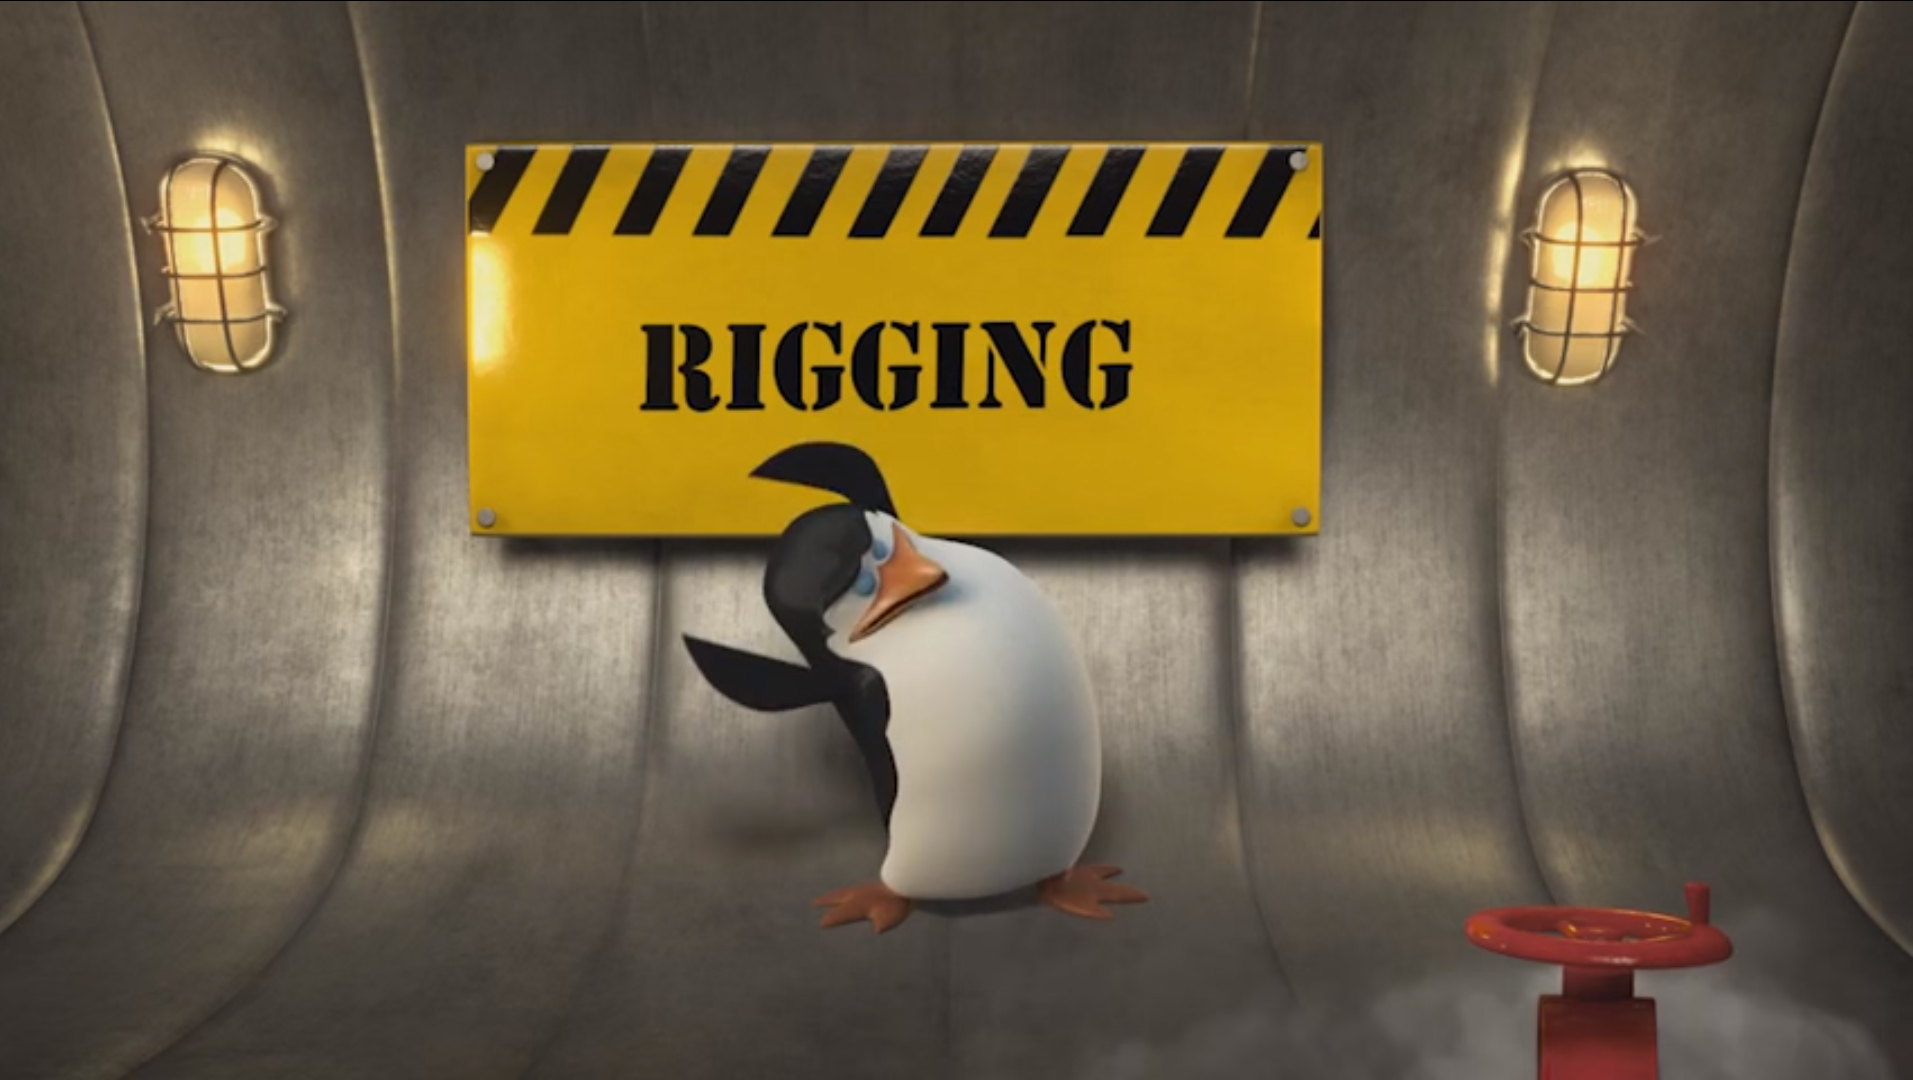 Penguins show us the Pipeline of Dreamworks Animation Studios